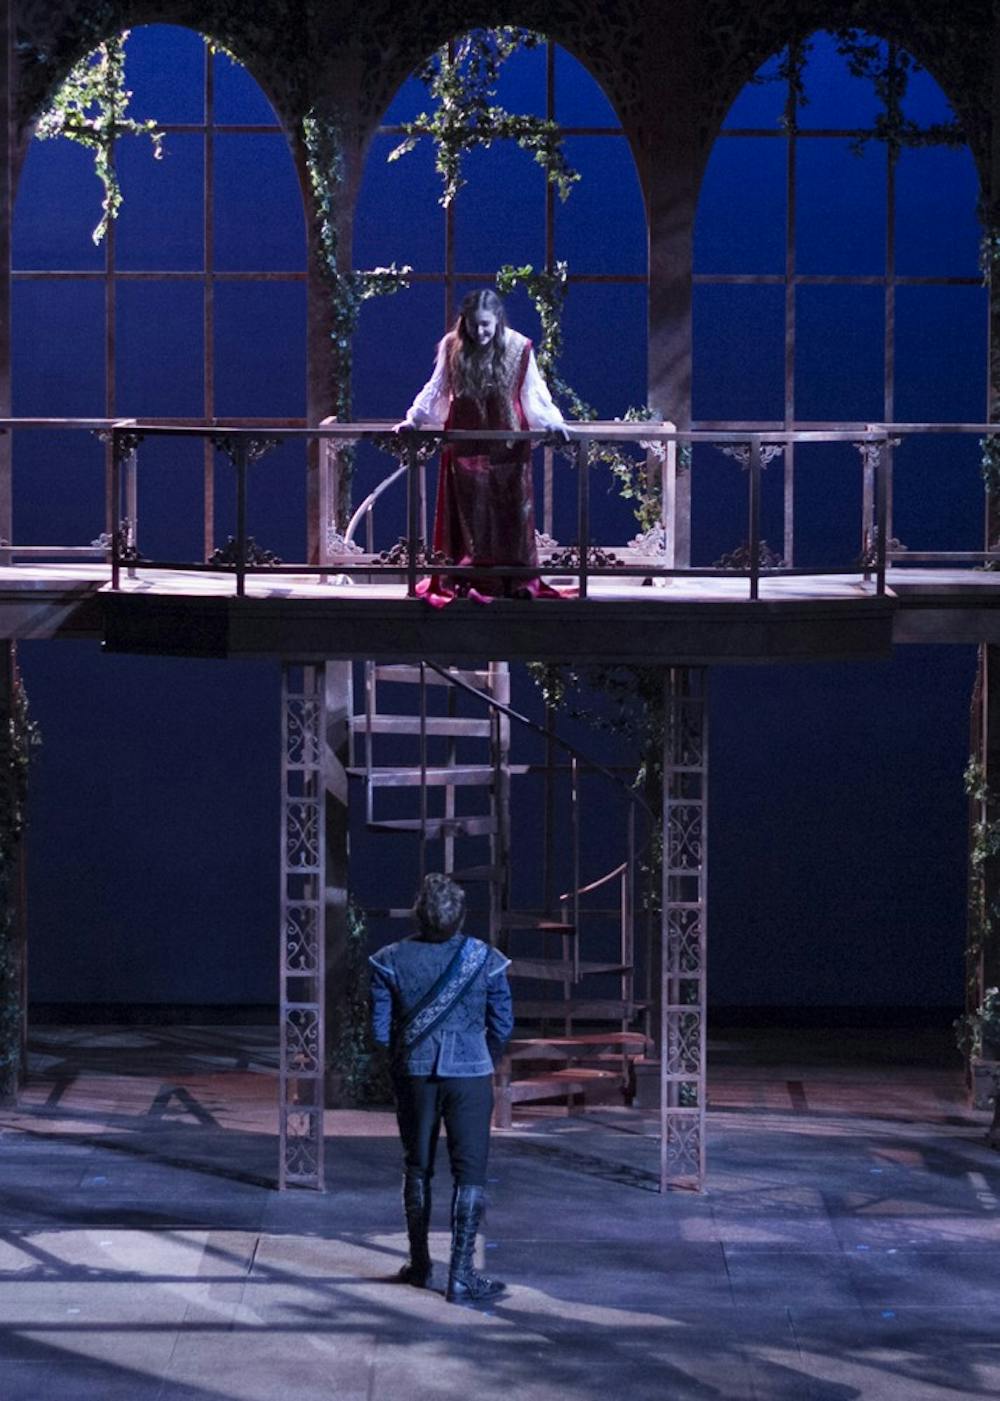 Josh Krause as Romeo and Marisa Eason as Juliet act in the dress rehearsal of "Romeo and Juliet" in the Ruth N. Halls Theatre on Tuesday night. "Romeo and Juliet" is an IU Theatre production and opens Friday.